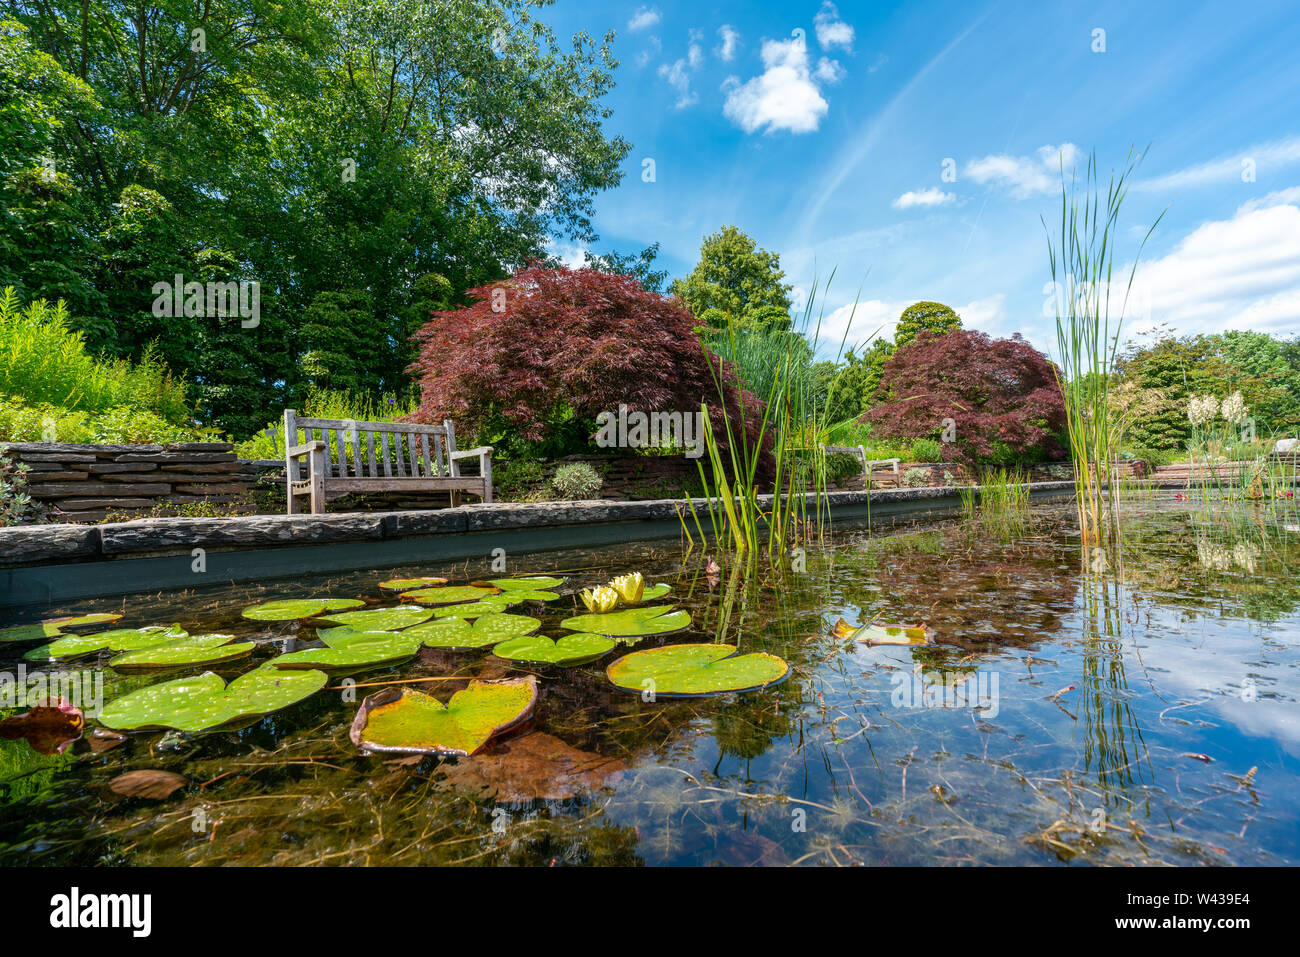 formal rectangular walled garden pond with water lilies and lily pads and a park bench and red acer in the background Stock Photo